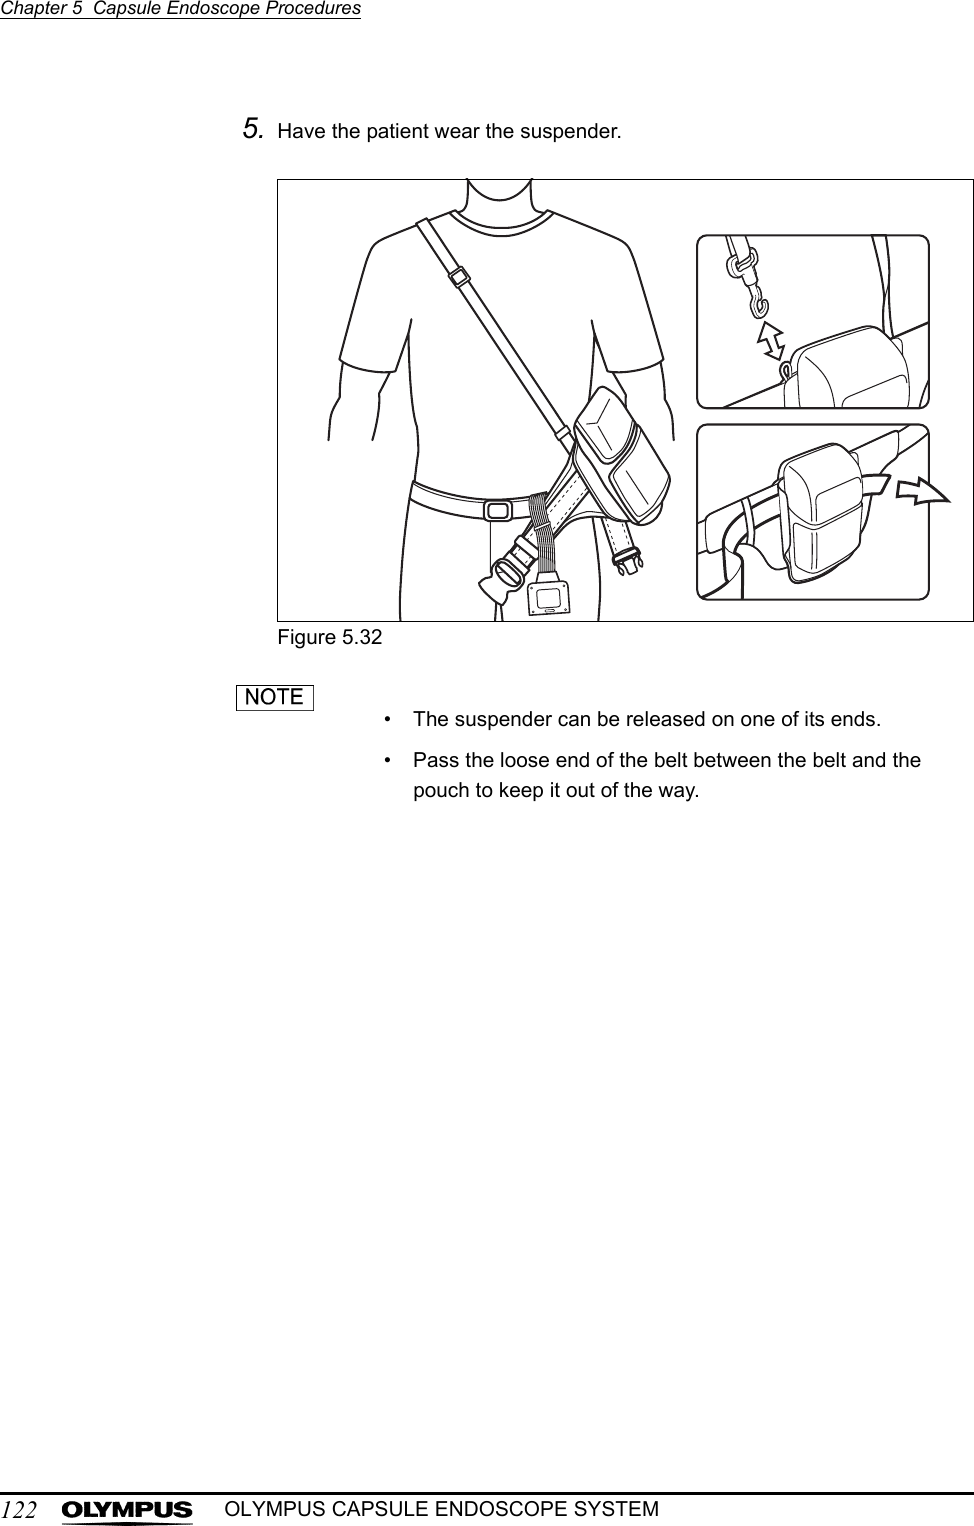 122Chapter 5  Capsule Endoscope ProceduresOLYMPUS CAPSULE ENDOSCOPE SYSTEM5. Have the patient wear the suspender.Figure 5.32• The suspender can be released on one of its ends.• Pass the loose end of the belt between the belt and the pouch to keep it out of the way.